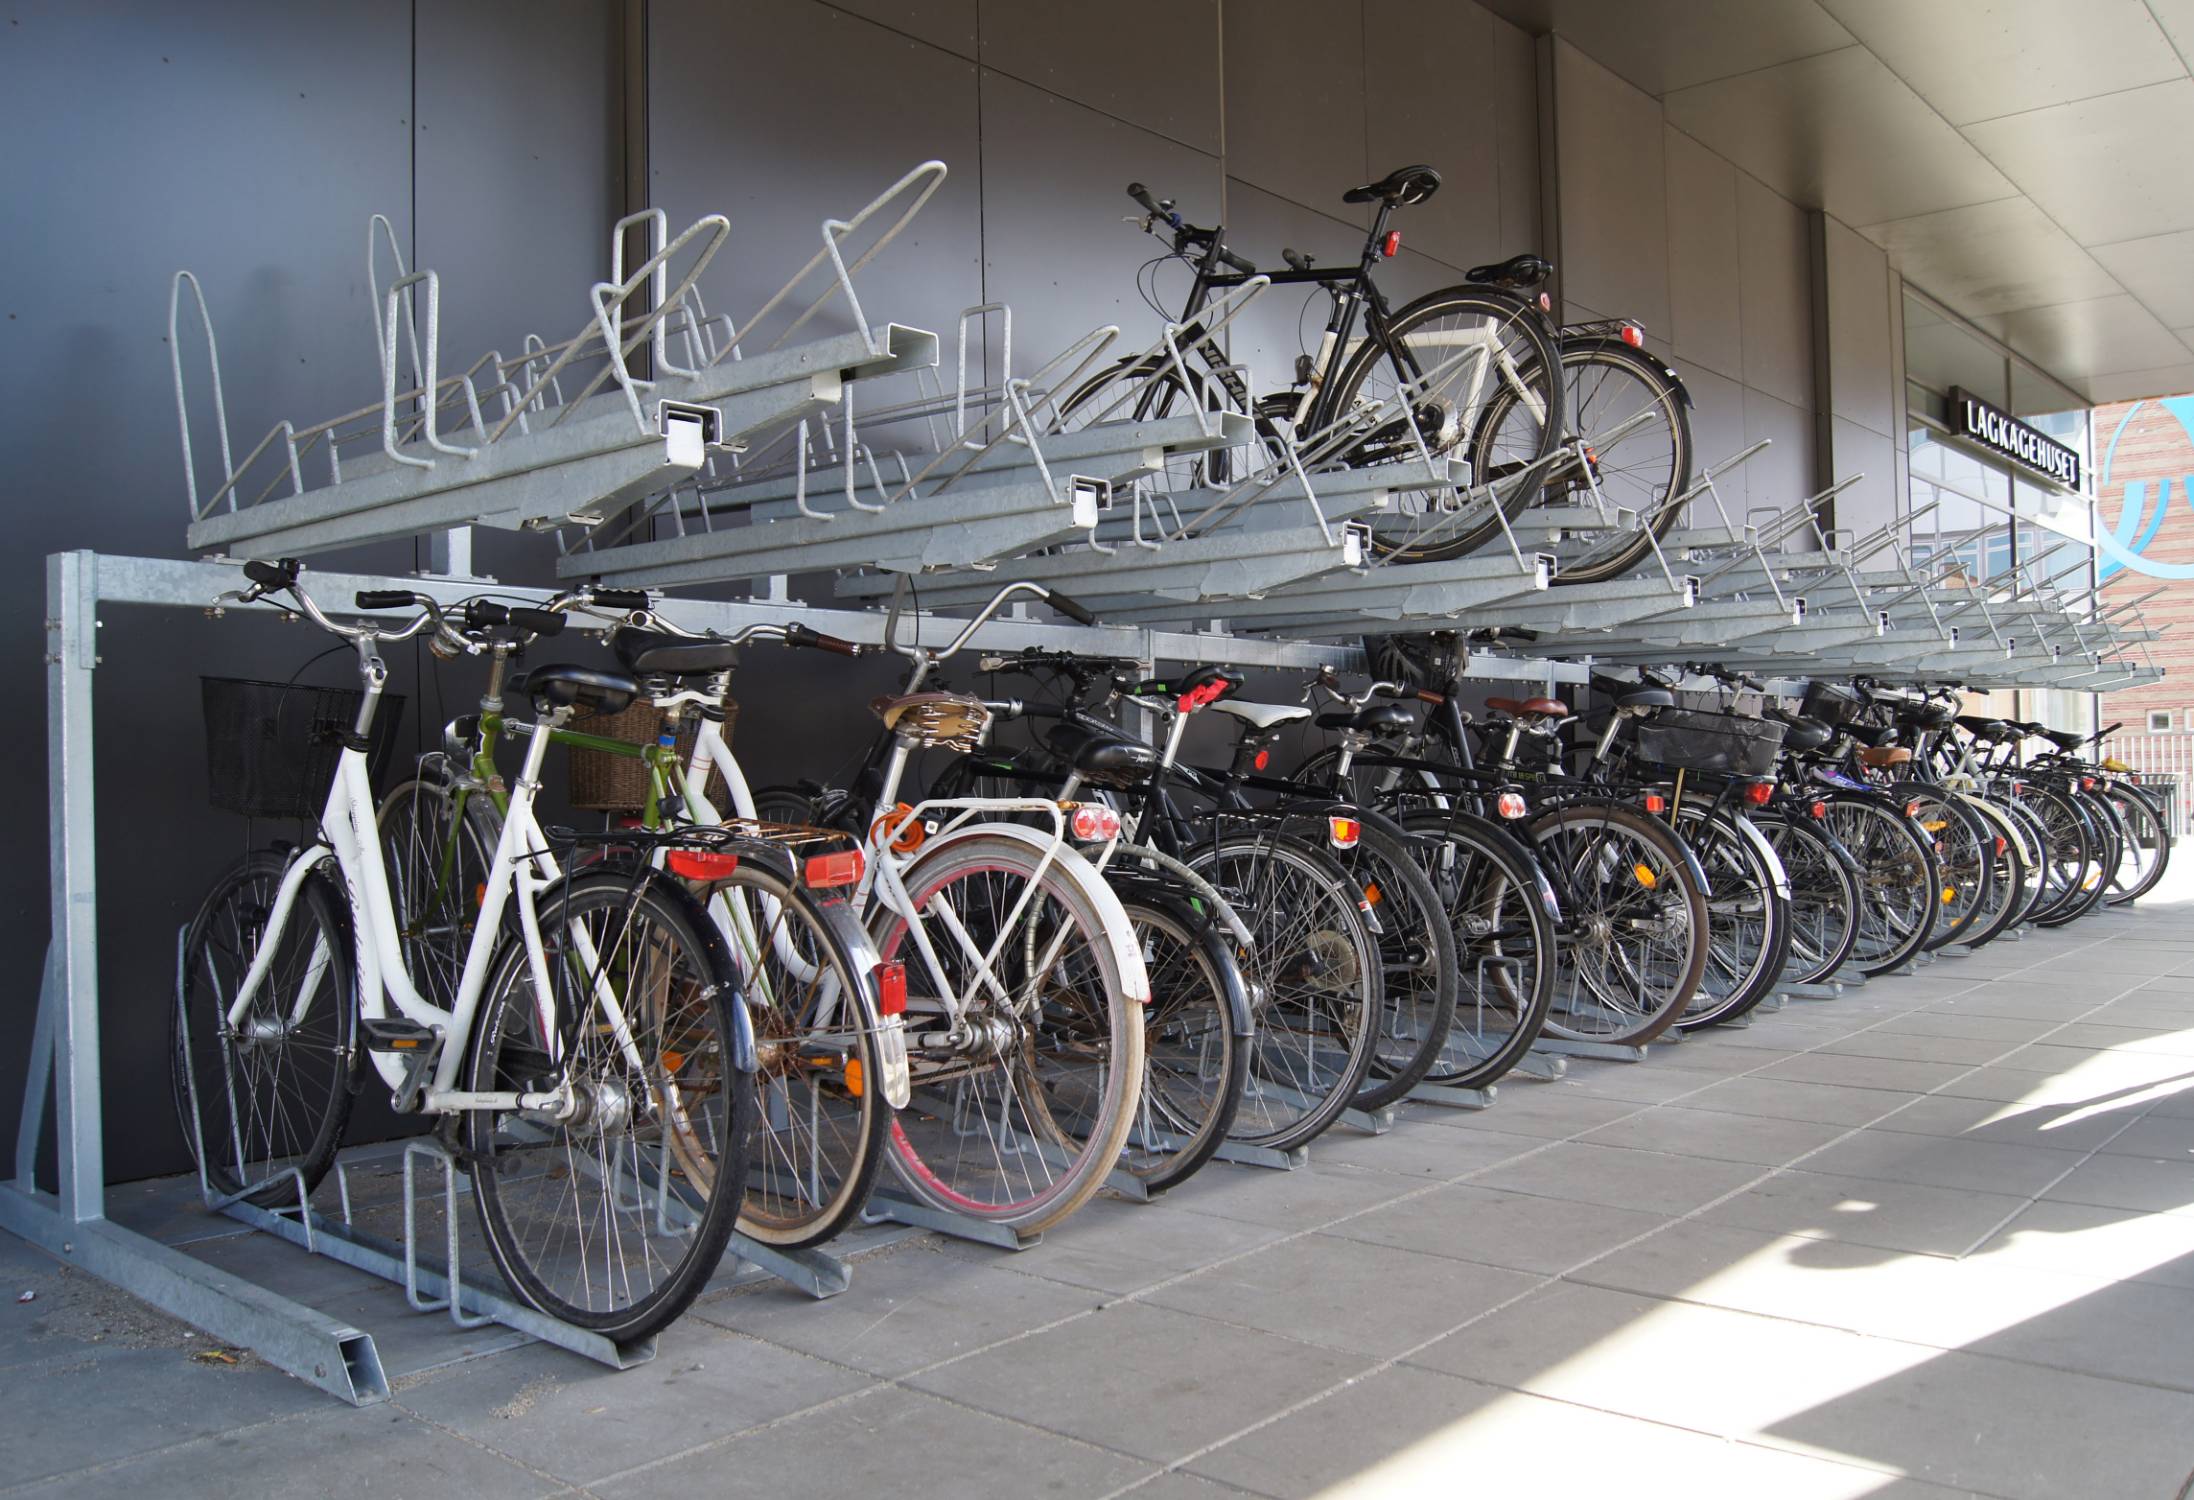 FalcoLevel-Eco Two Tier Cycle Rack - High Density Cycle Rack Design